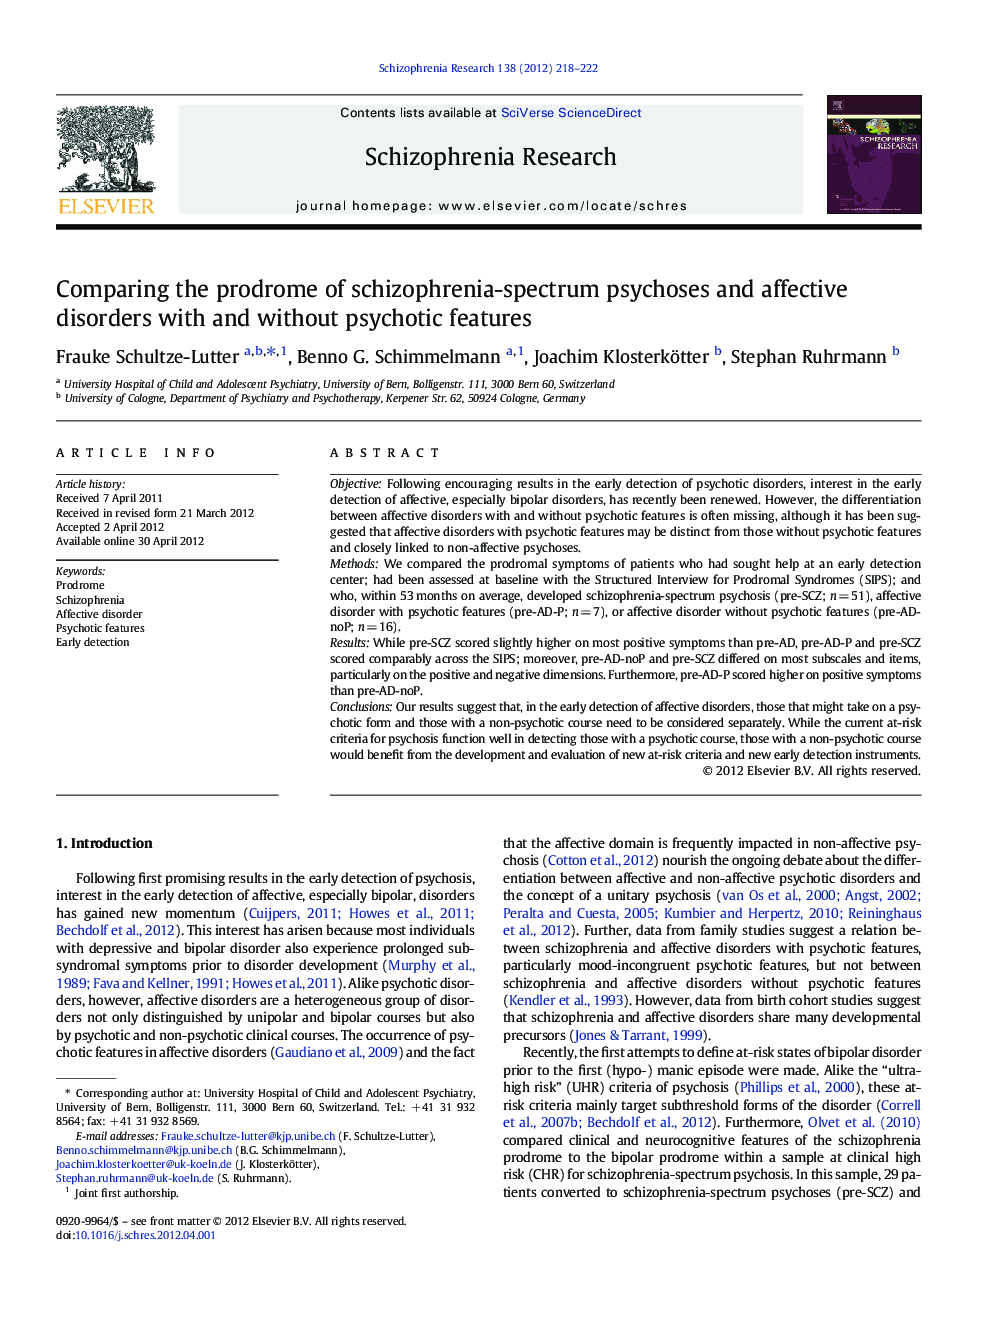 Comparing the prodrome of schizophrenia-spectrum psychoses and affective disorders with and without psychotic features